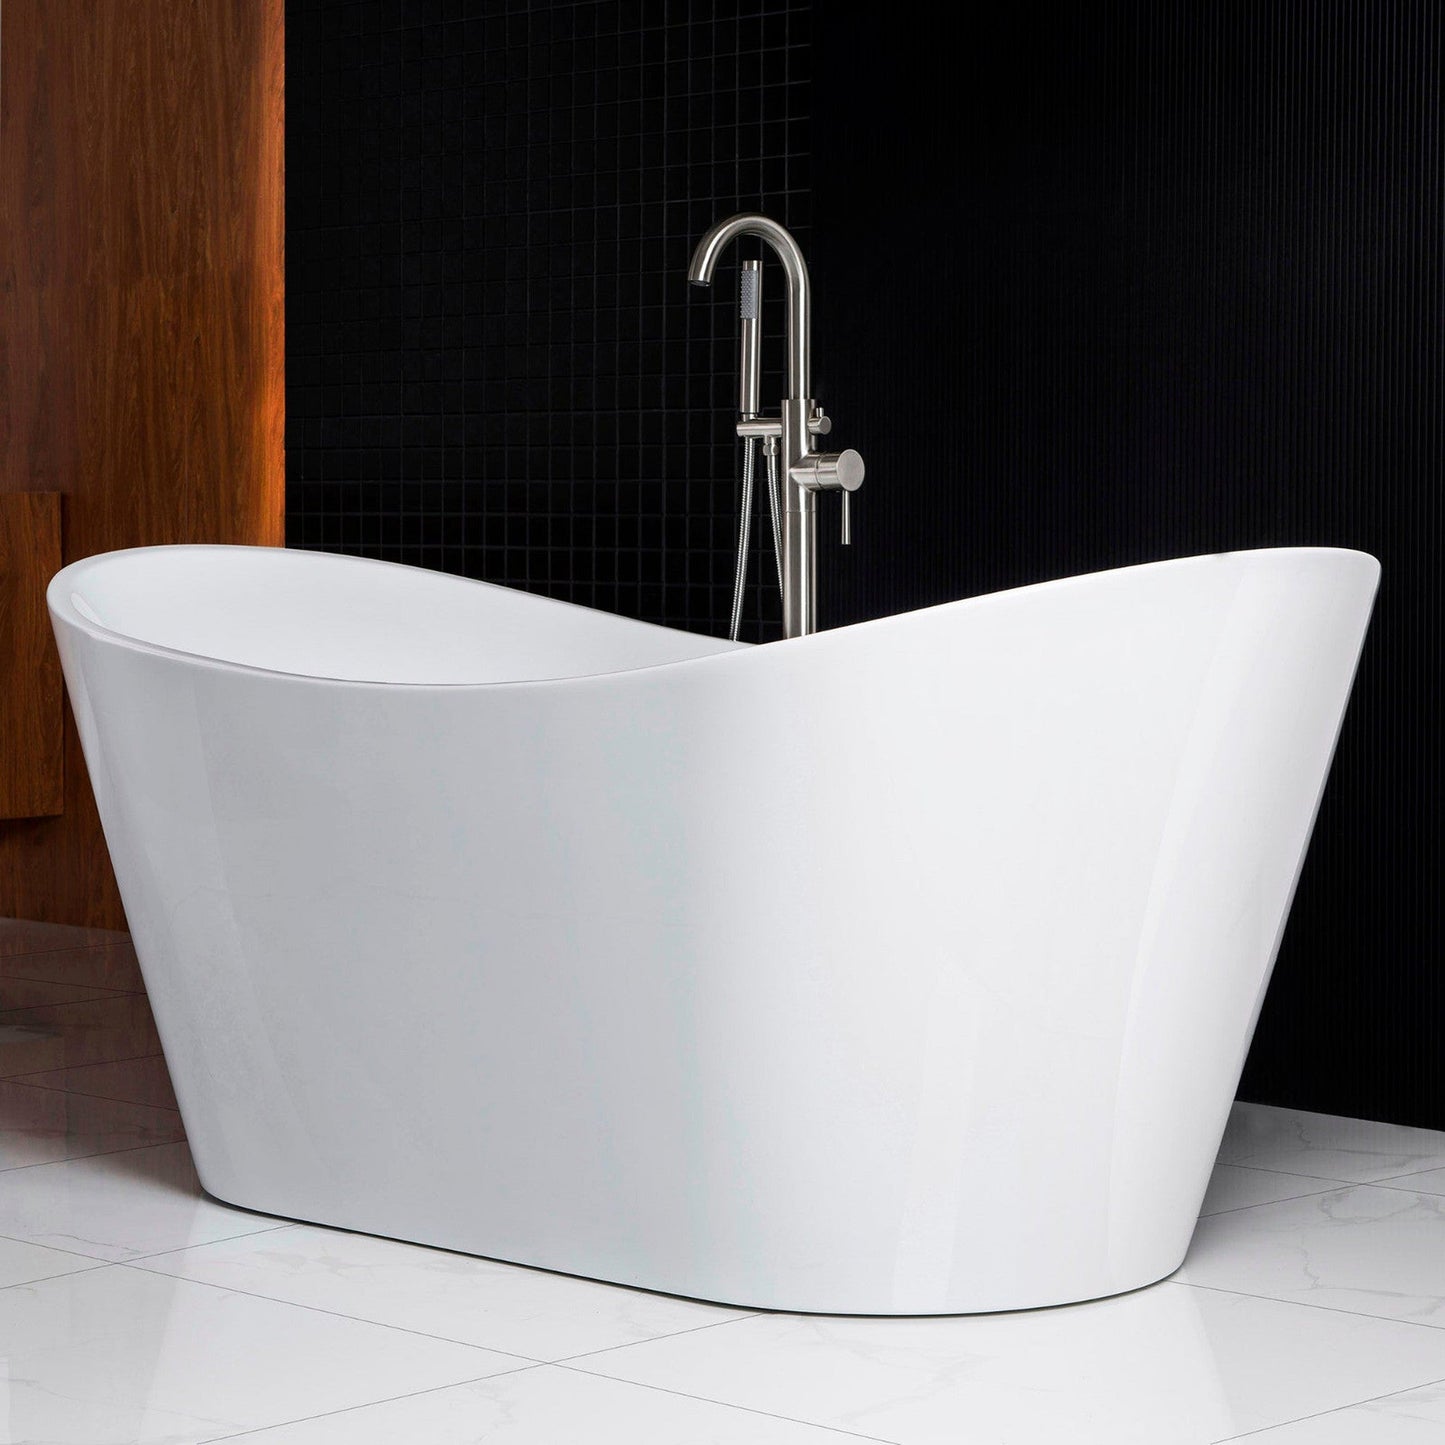 WoodBridge B0010 67" White Acrylic Freestanding Contemporary Soaking Bathtub With Brushed Nickel Drain, Overflow, F0001BNVT Tub Filler and Caddy Tray